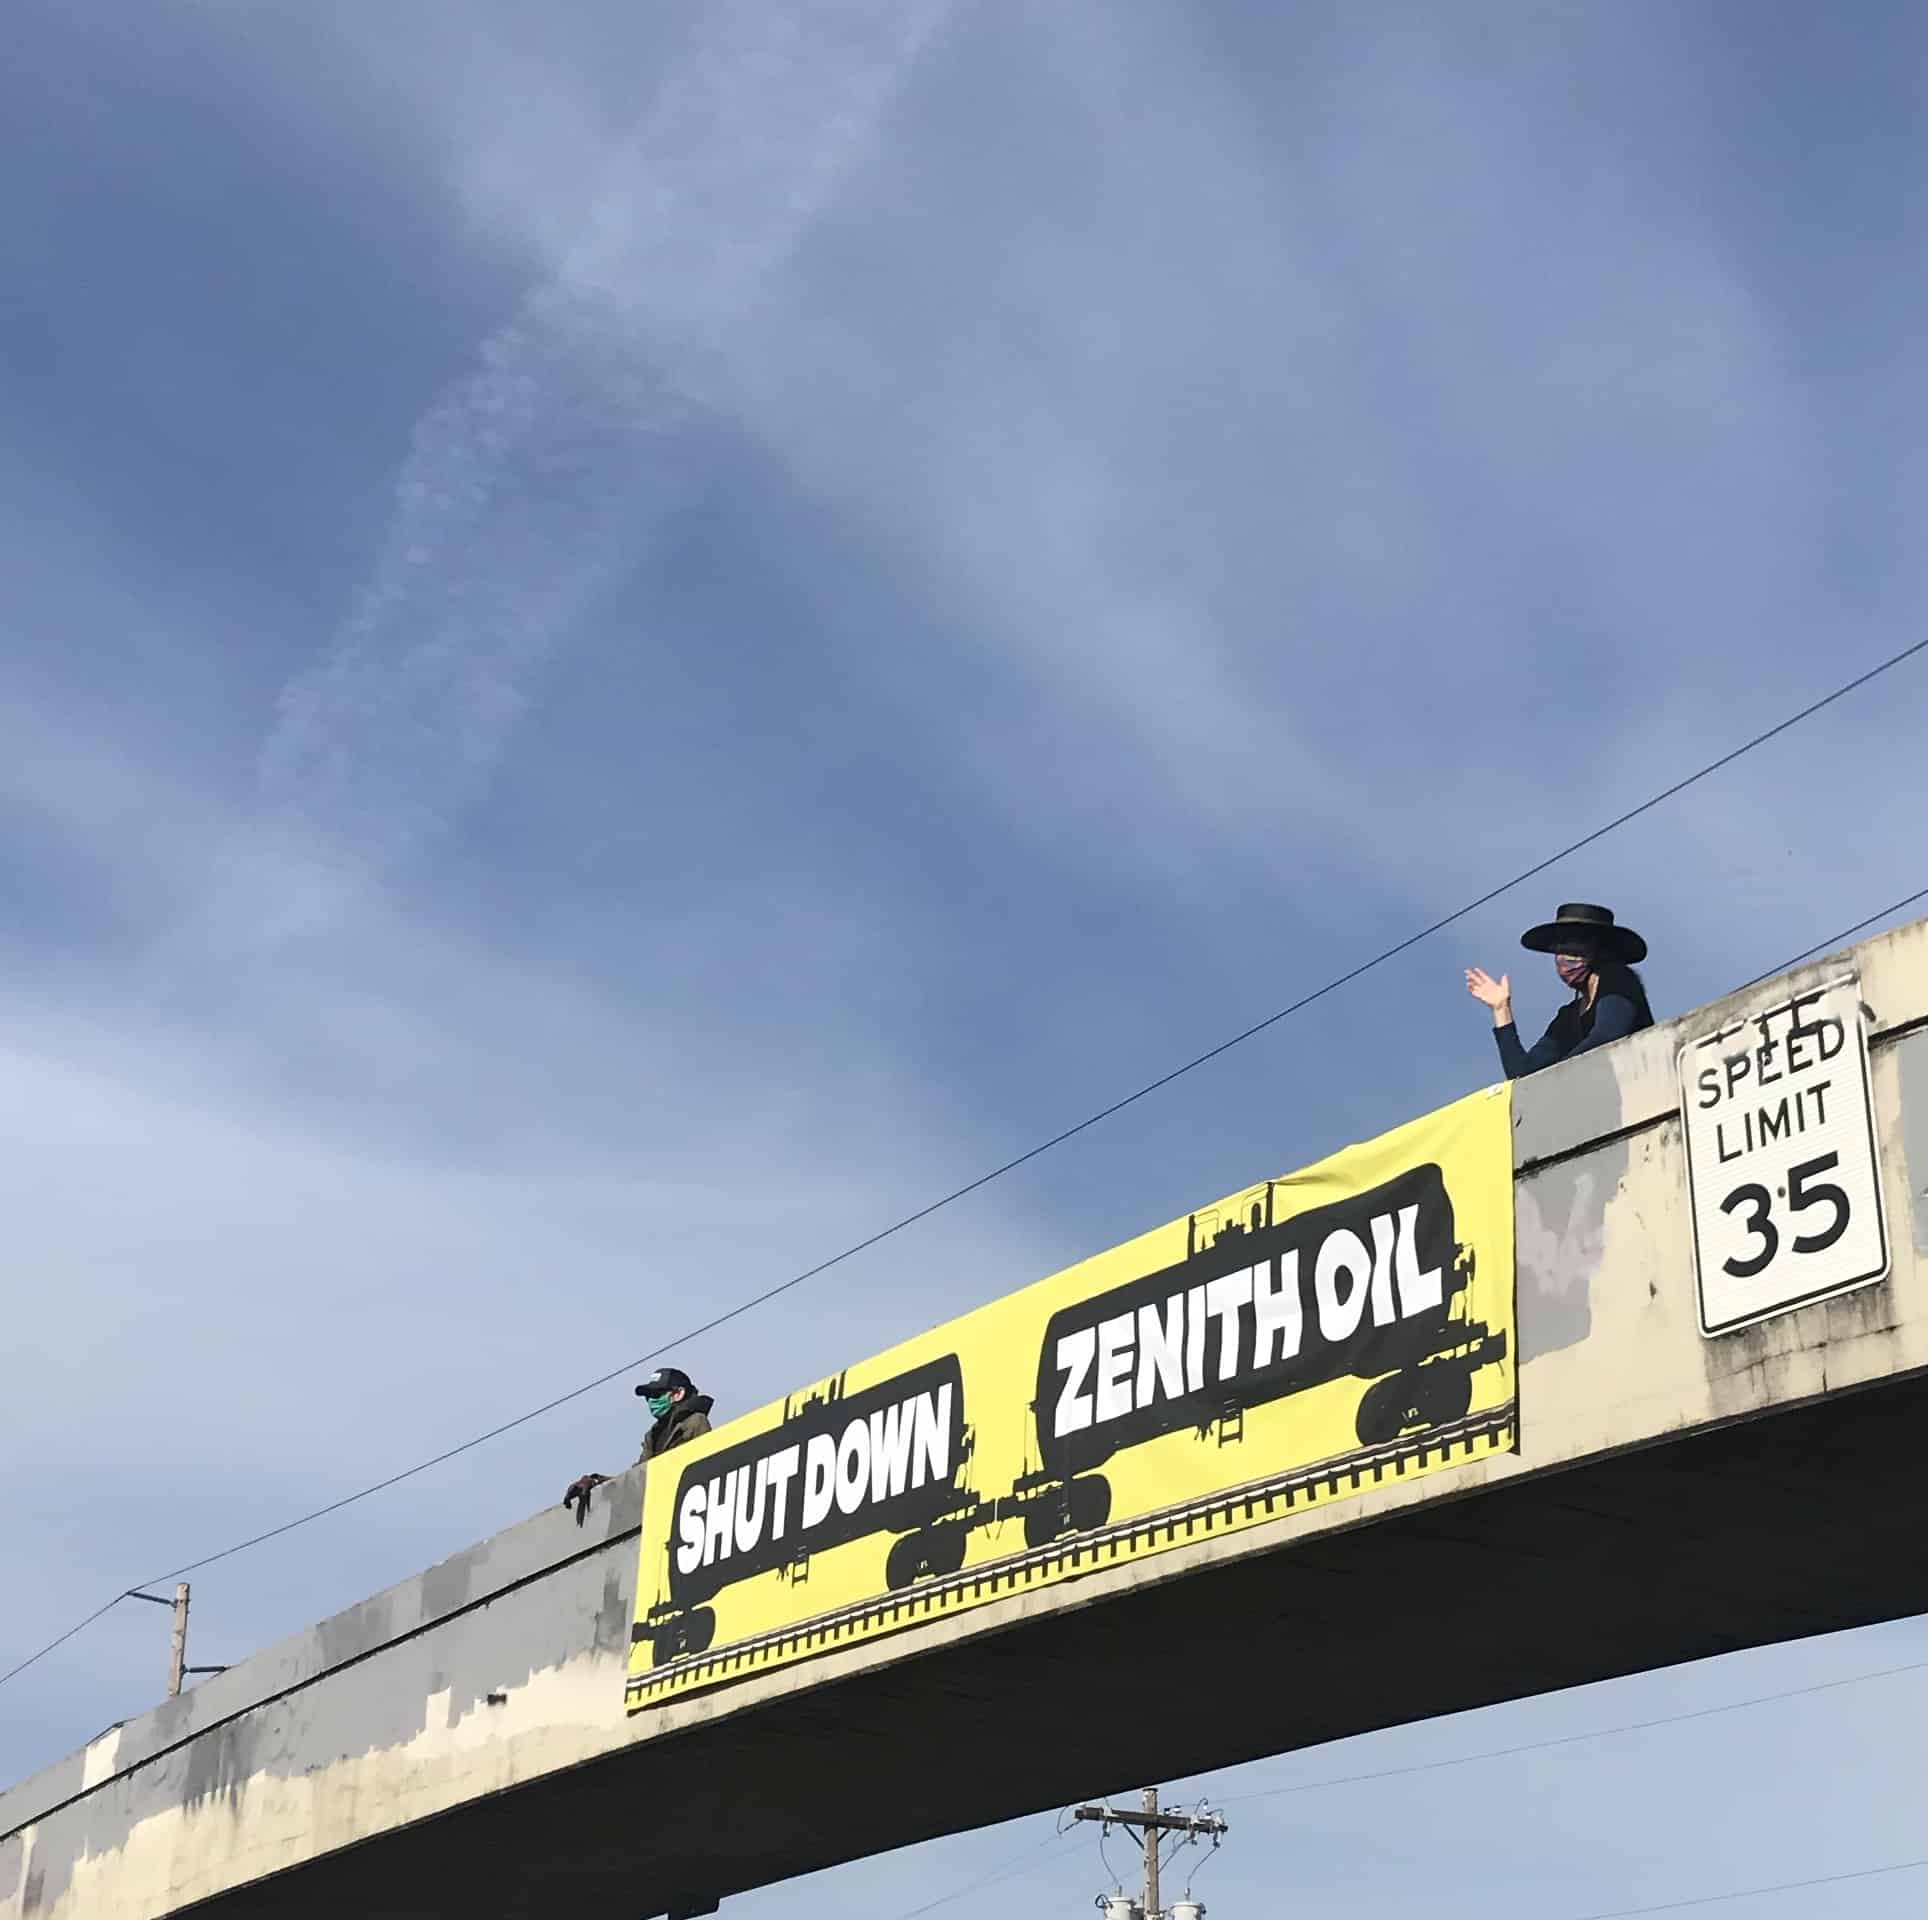 Two people standing on a pedestrian overpass holding a yellow banner that says "Shutdown Zenith Oil".